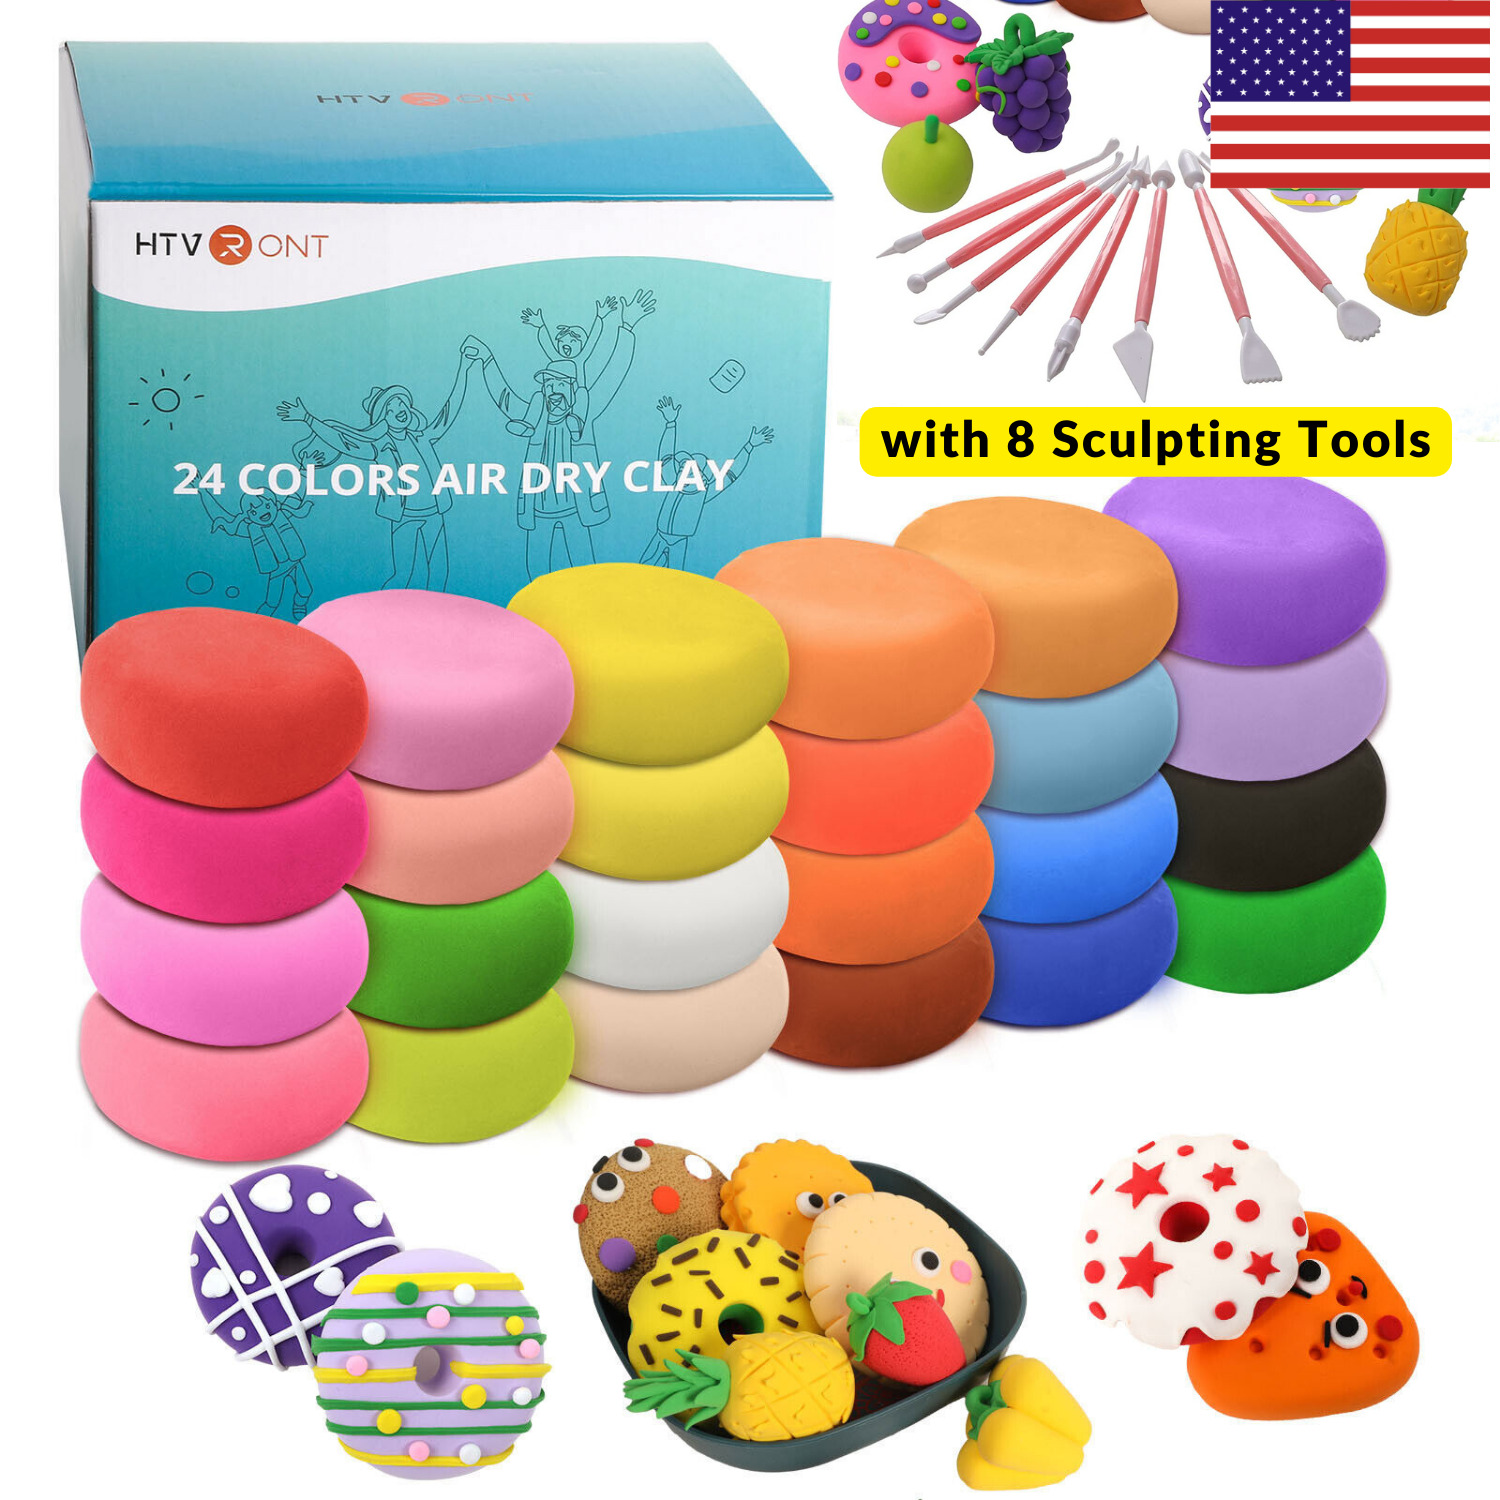 24 Colors Air Dry Clay Modeling Clay for Kids Light DIY Non-Toxic & No Baking US